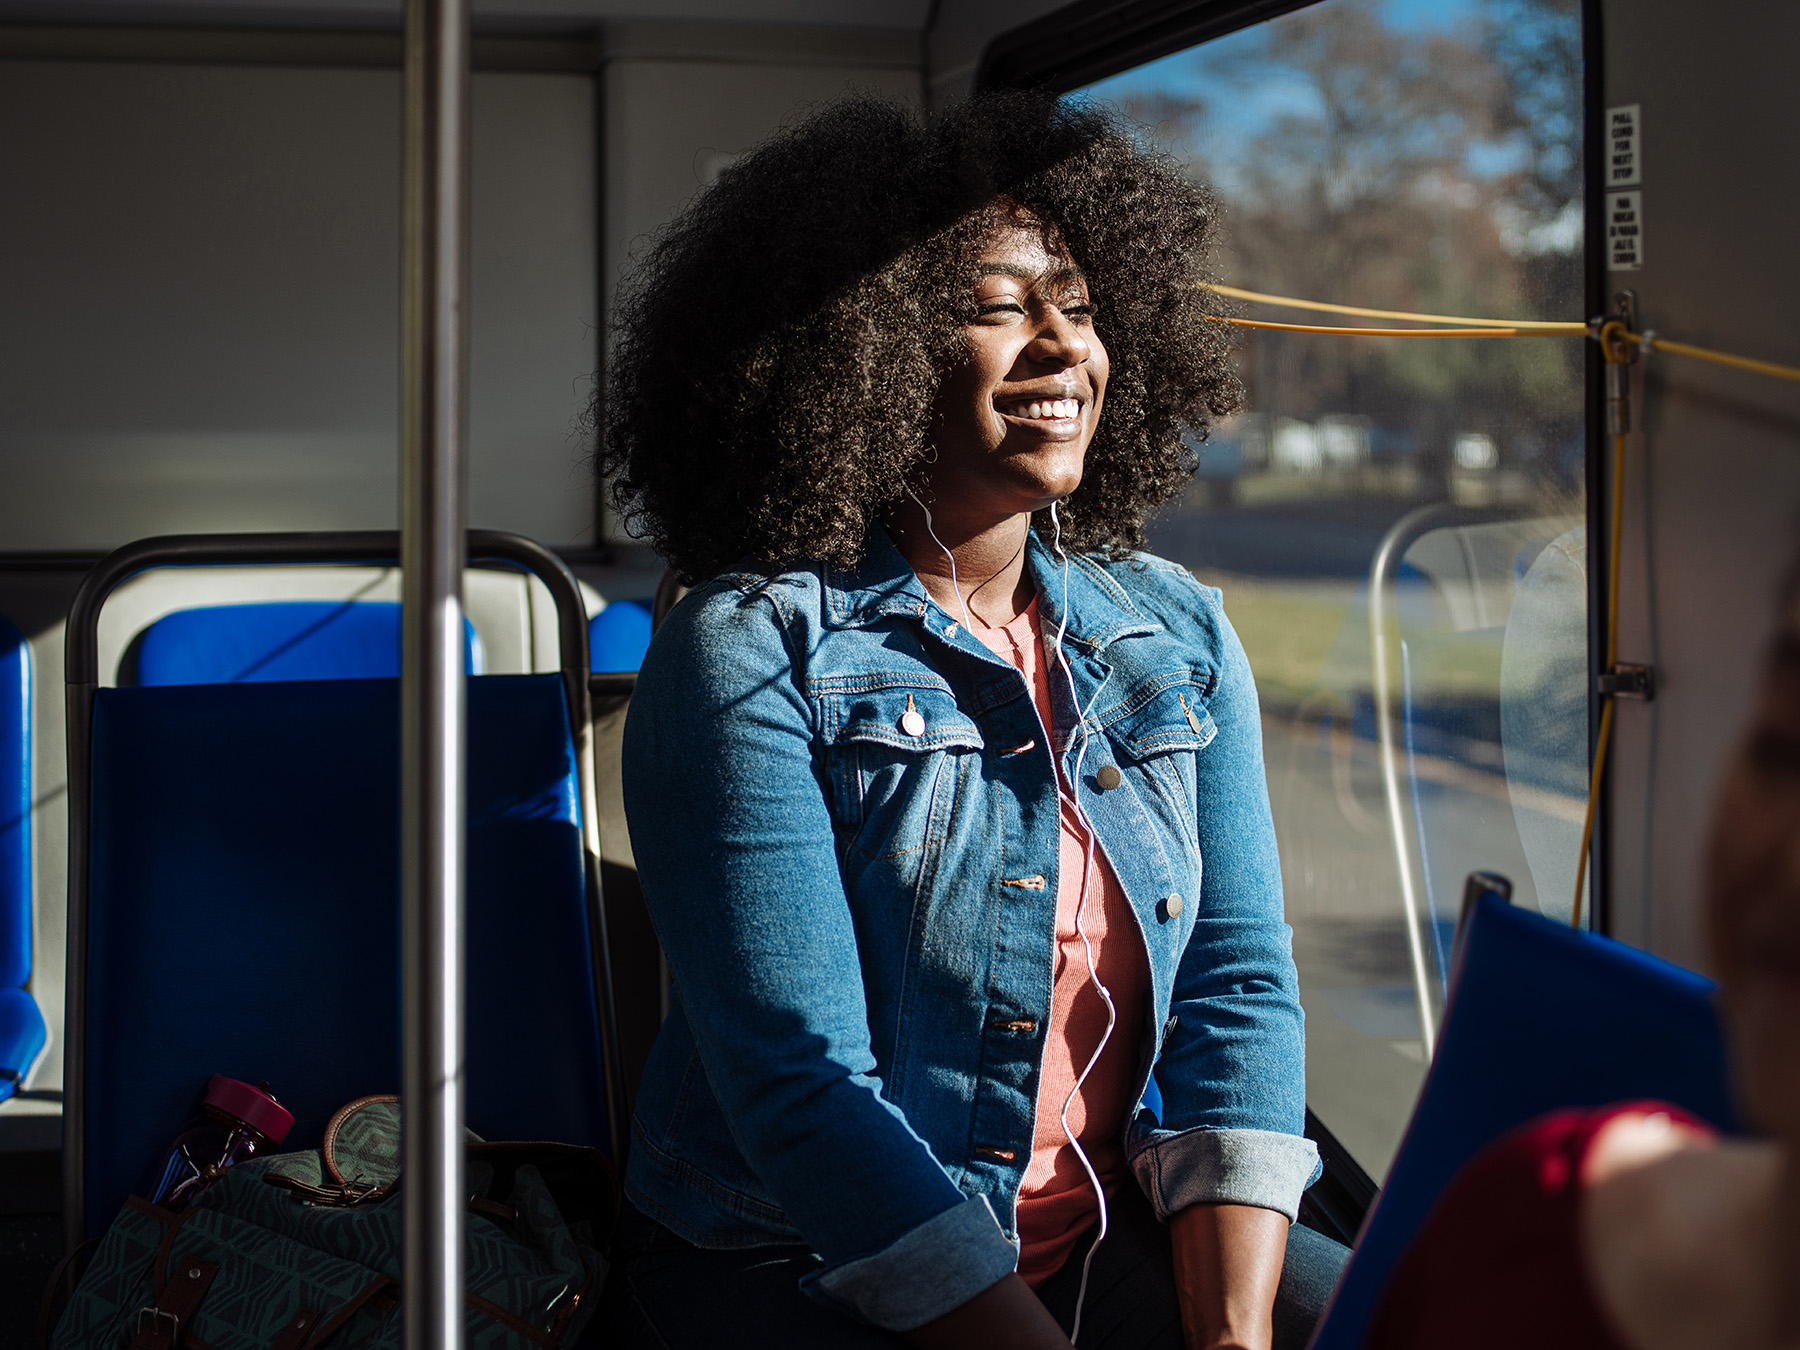 A rider smiles on a VIA bus in San Antonio, TX by commercial photographer Josh Huskin